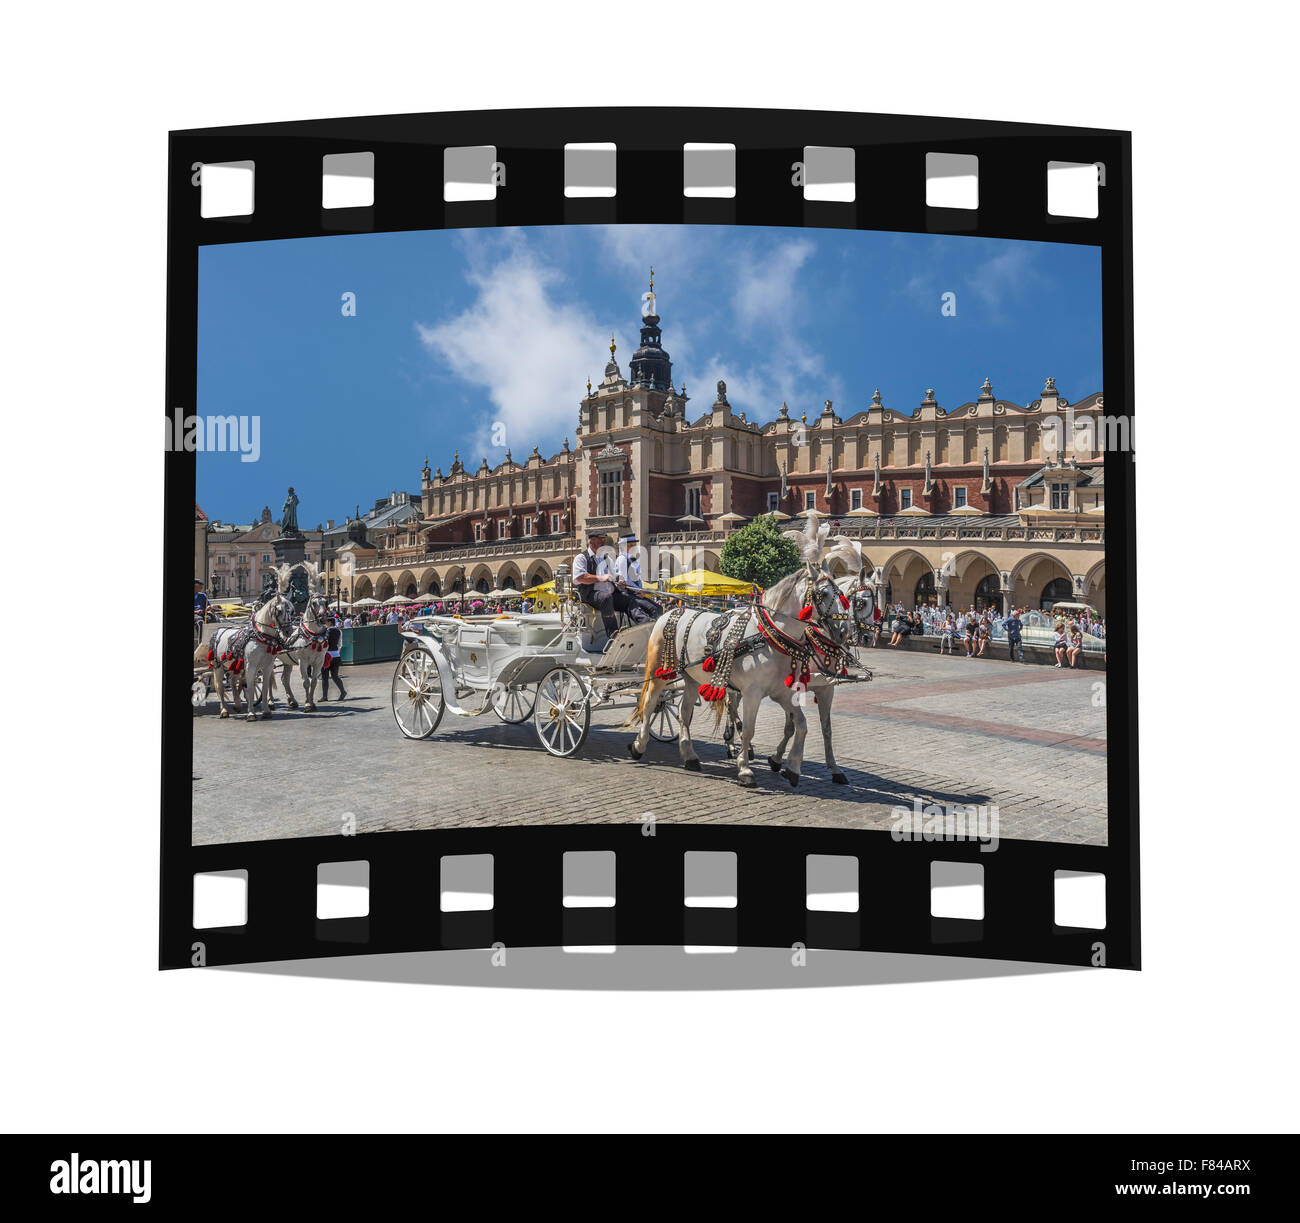 Horse-drawn carriages await tourists on the Krakow Cloth Hall, of the Main Market Square, Poland, Lesser Poland, Europe Stock Photo